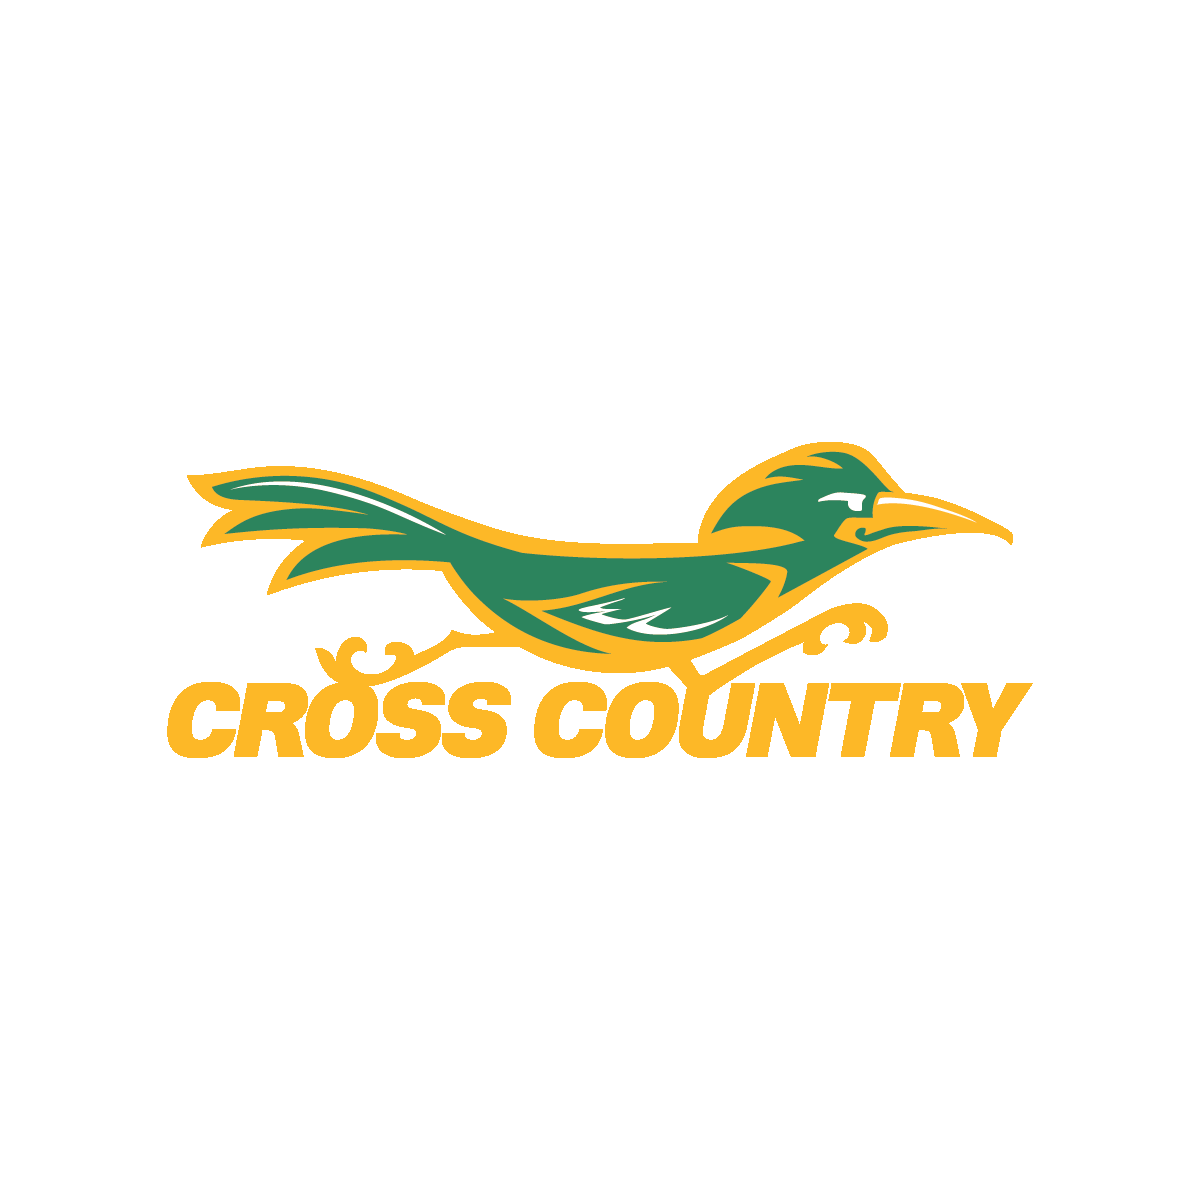 Cross Country mascot - yellow text